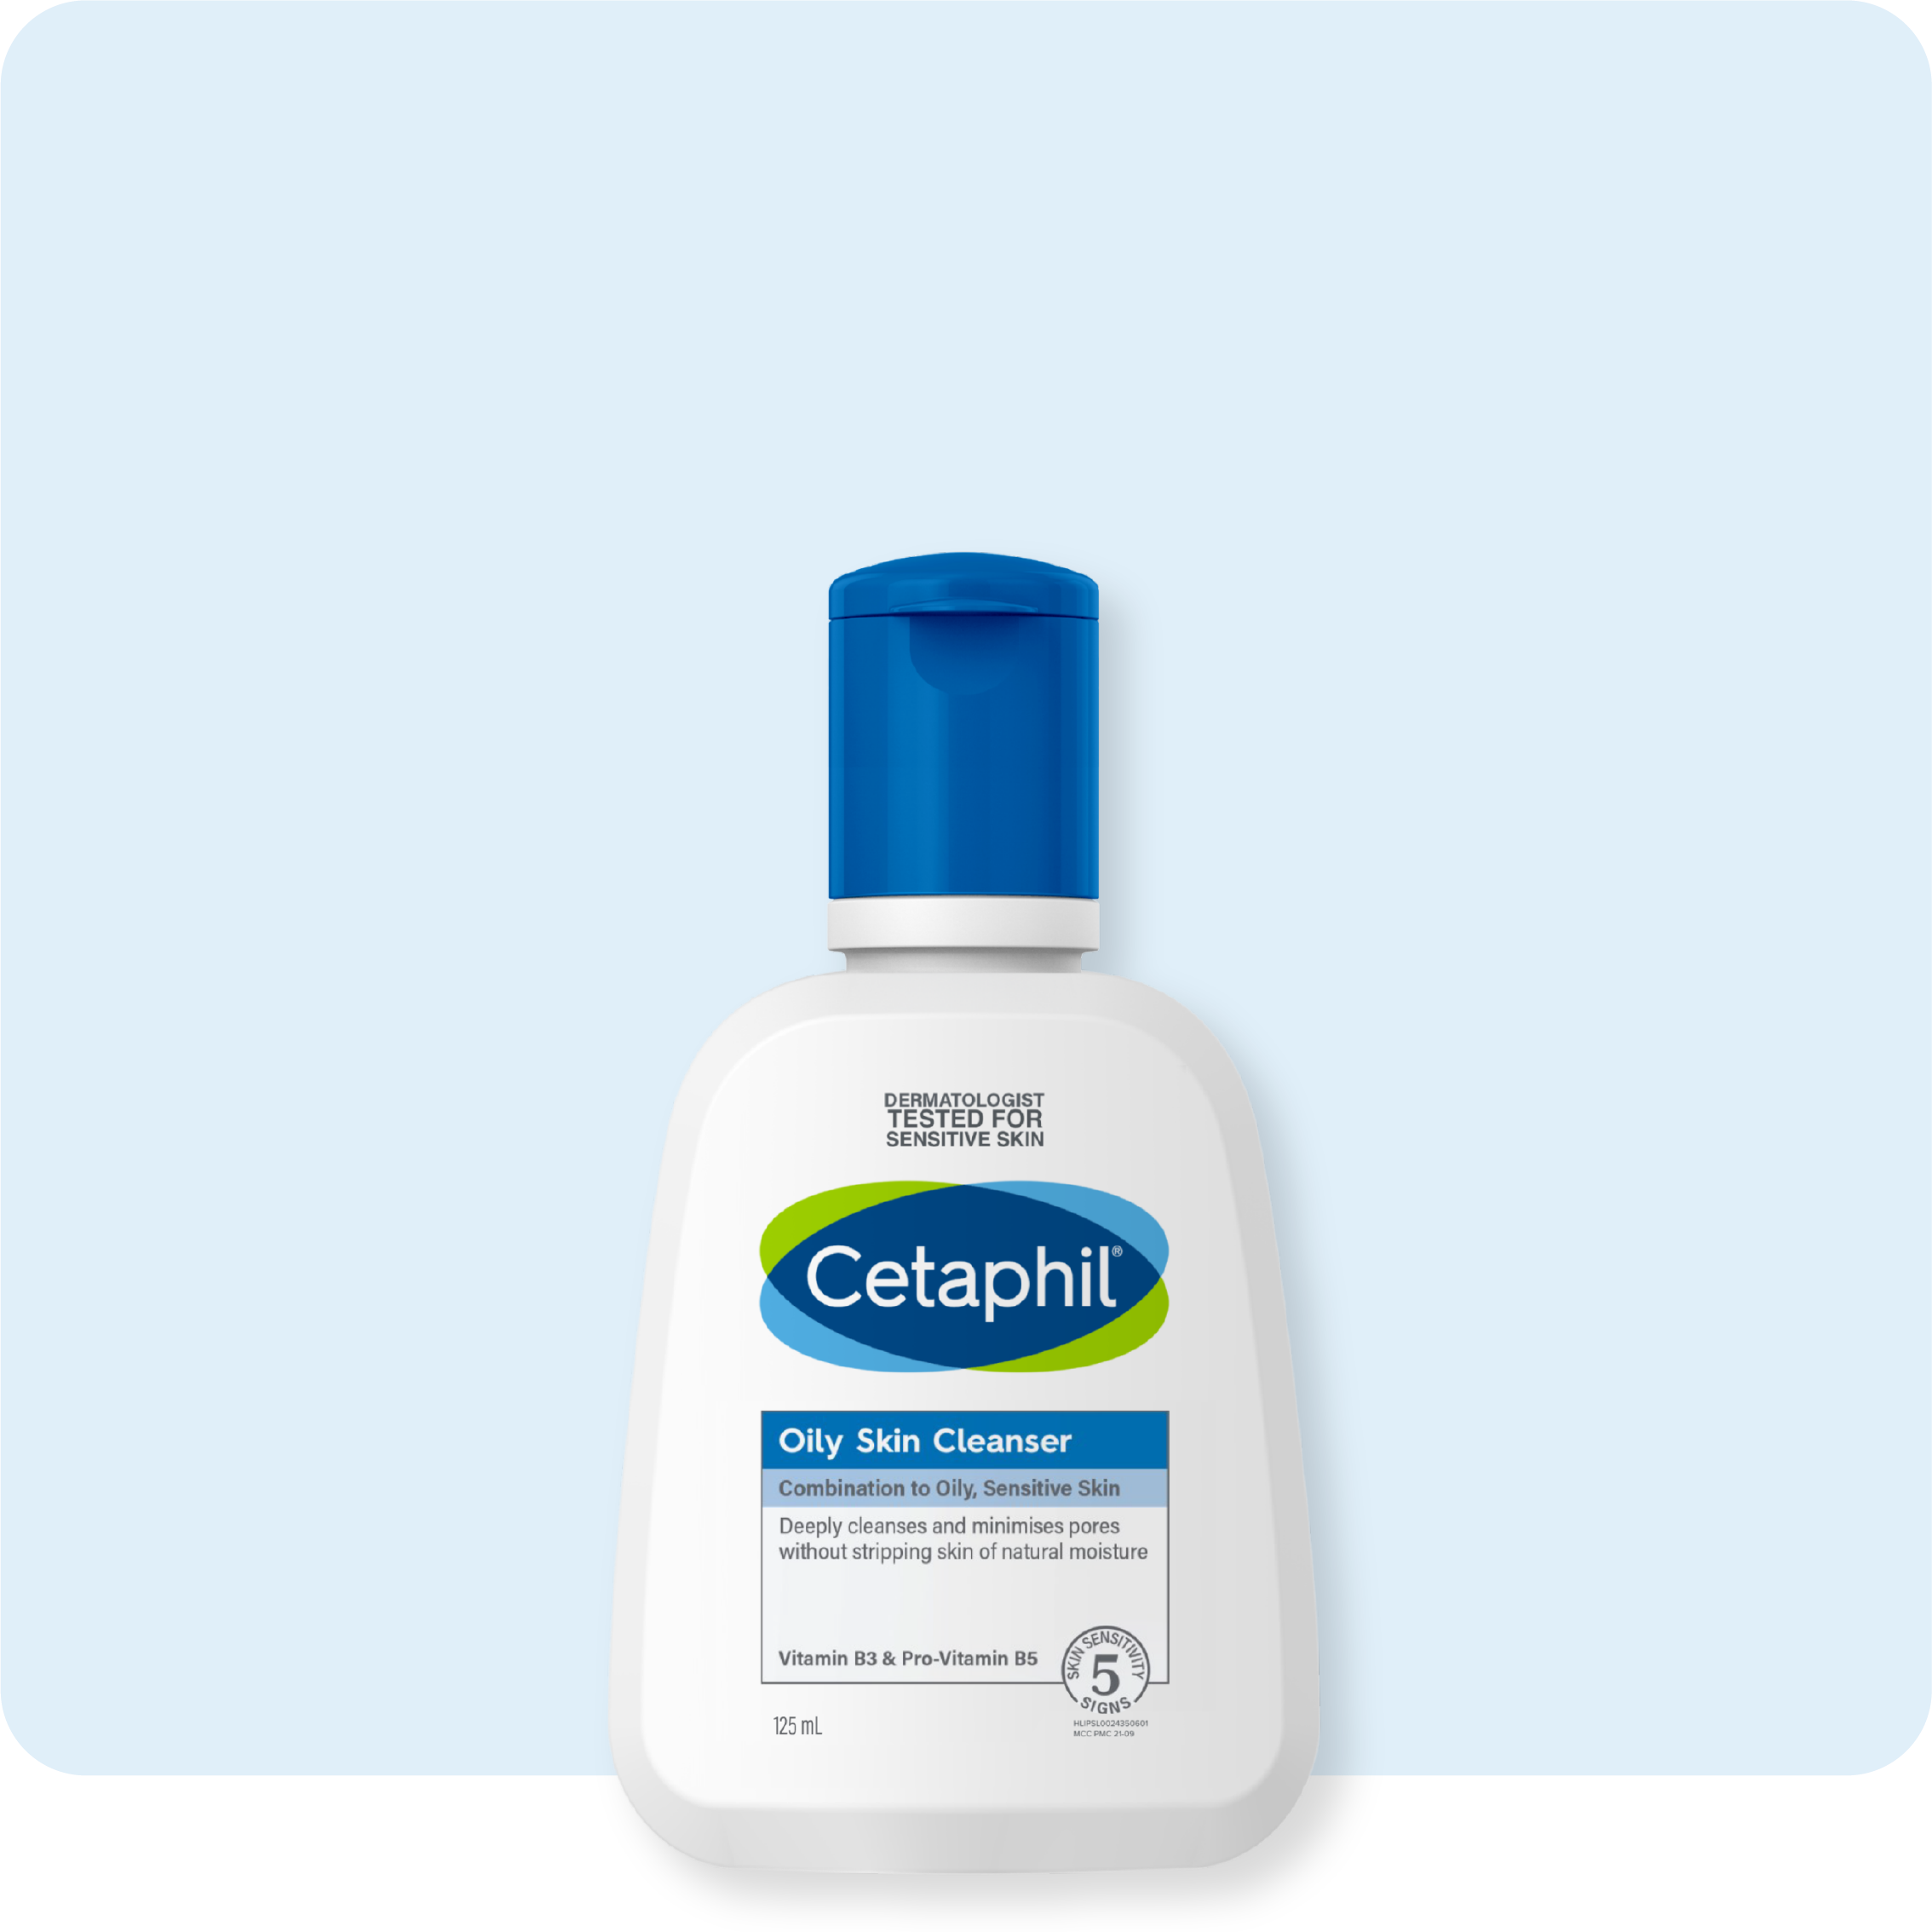 Get Rid of Acne with Oily Skin Cleanser | Cetaphil